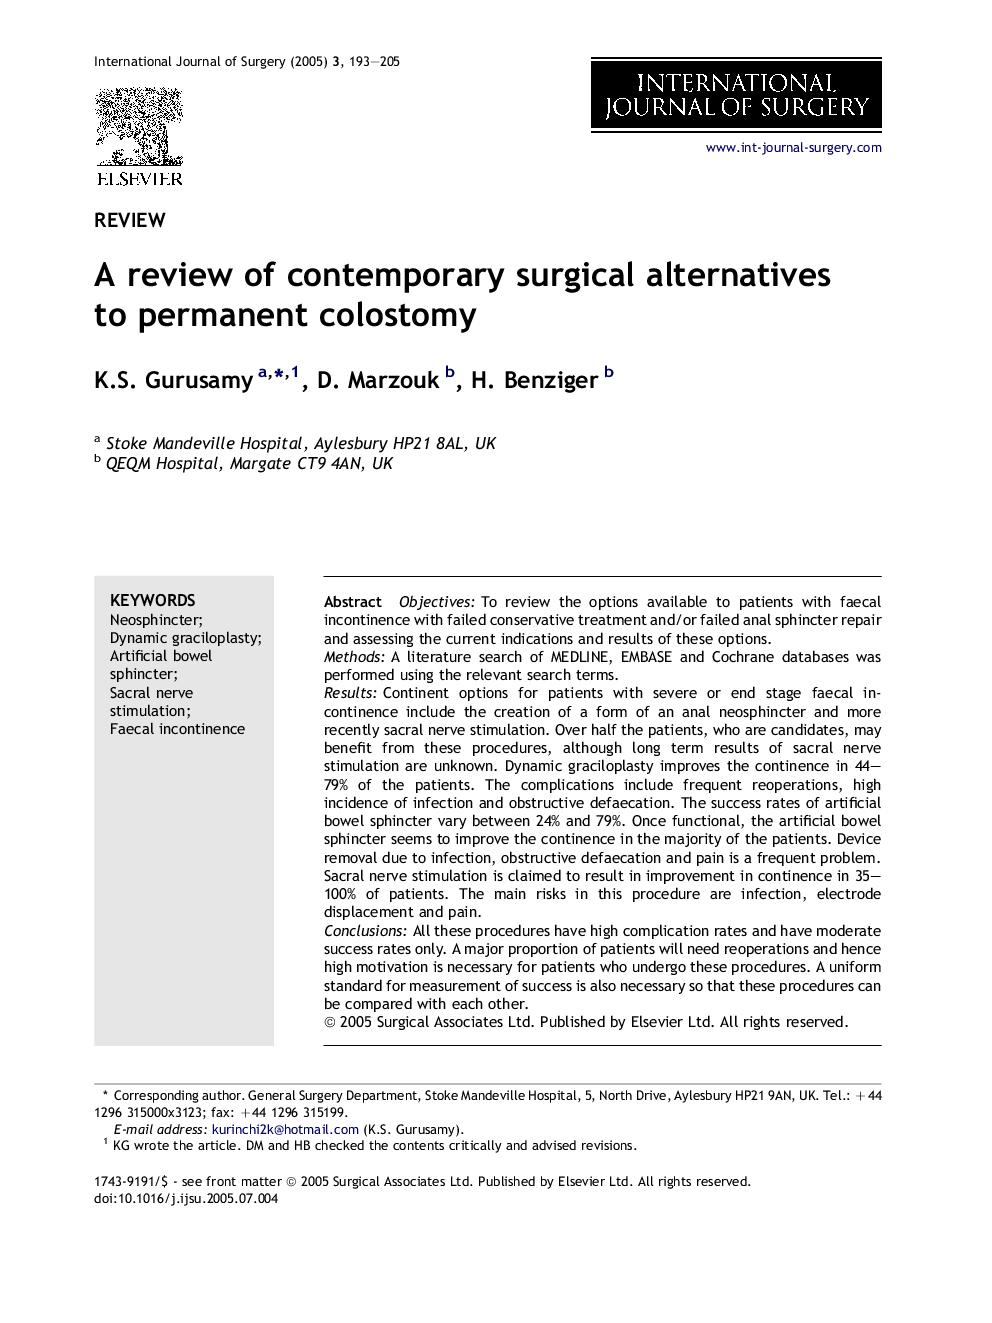 A review of contemporary surgical alternatives to permanent colostomy